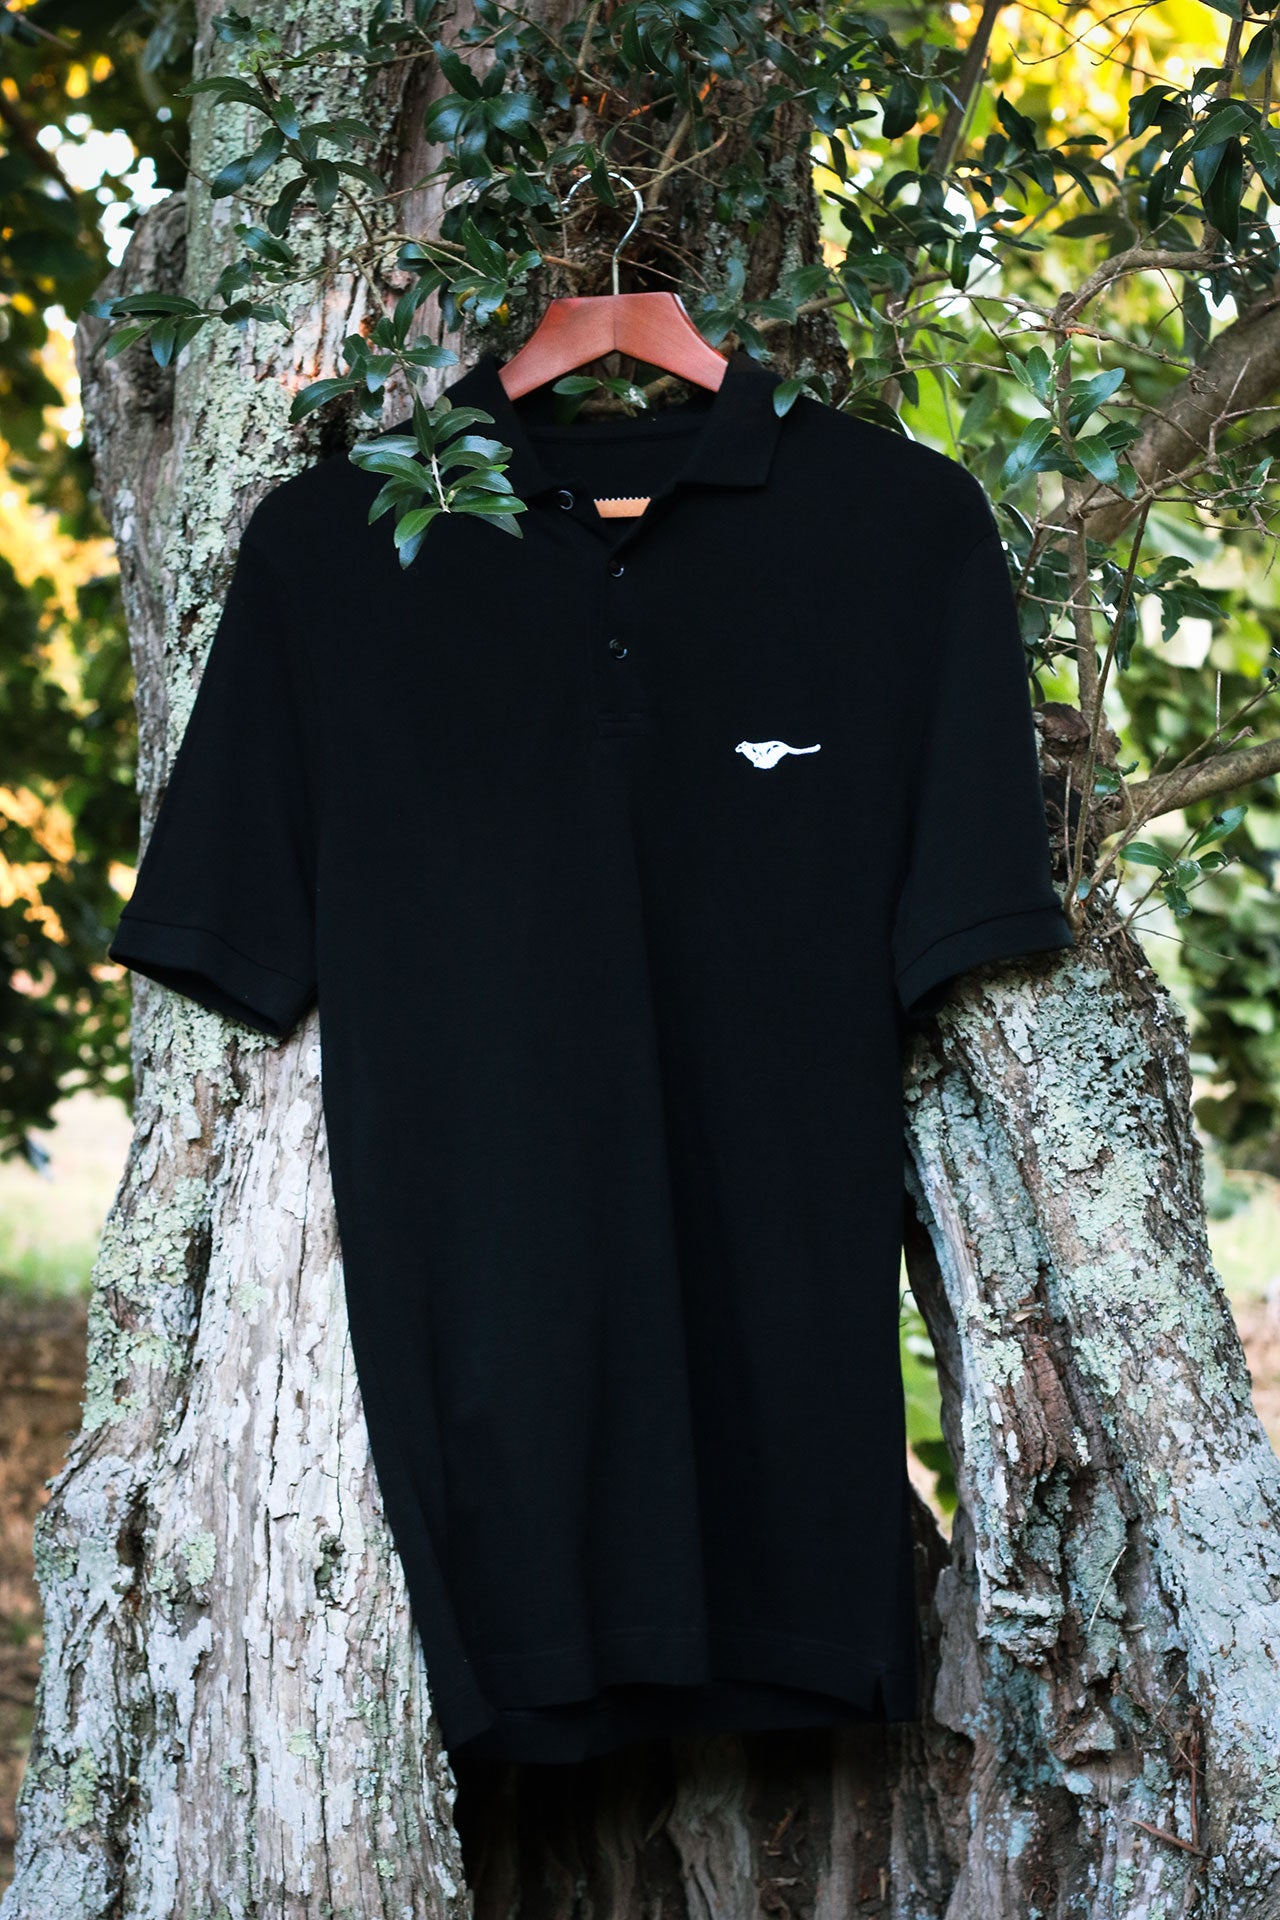 picth-black-biodegradable-pure-merino-wool-golf-polo-shirt-for men-by-snöleo.-hanging-in-olive-tree